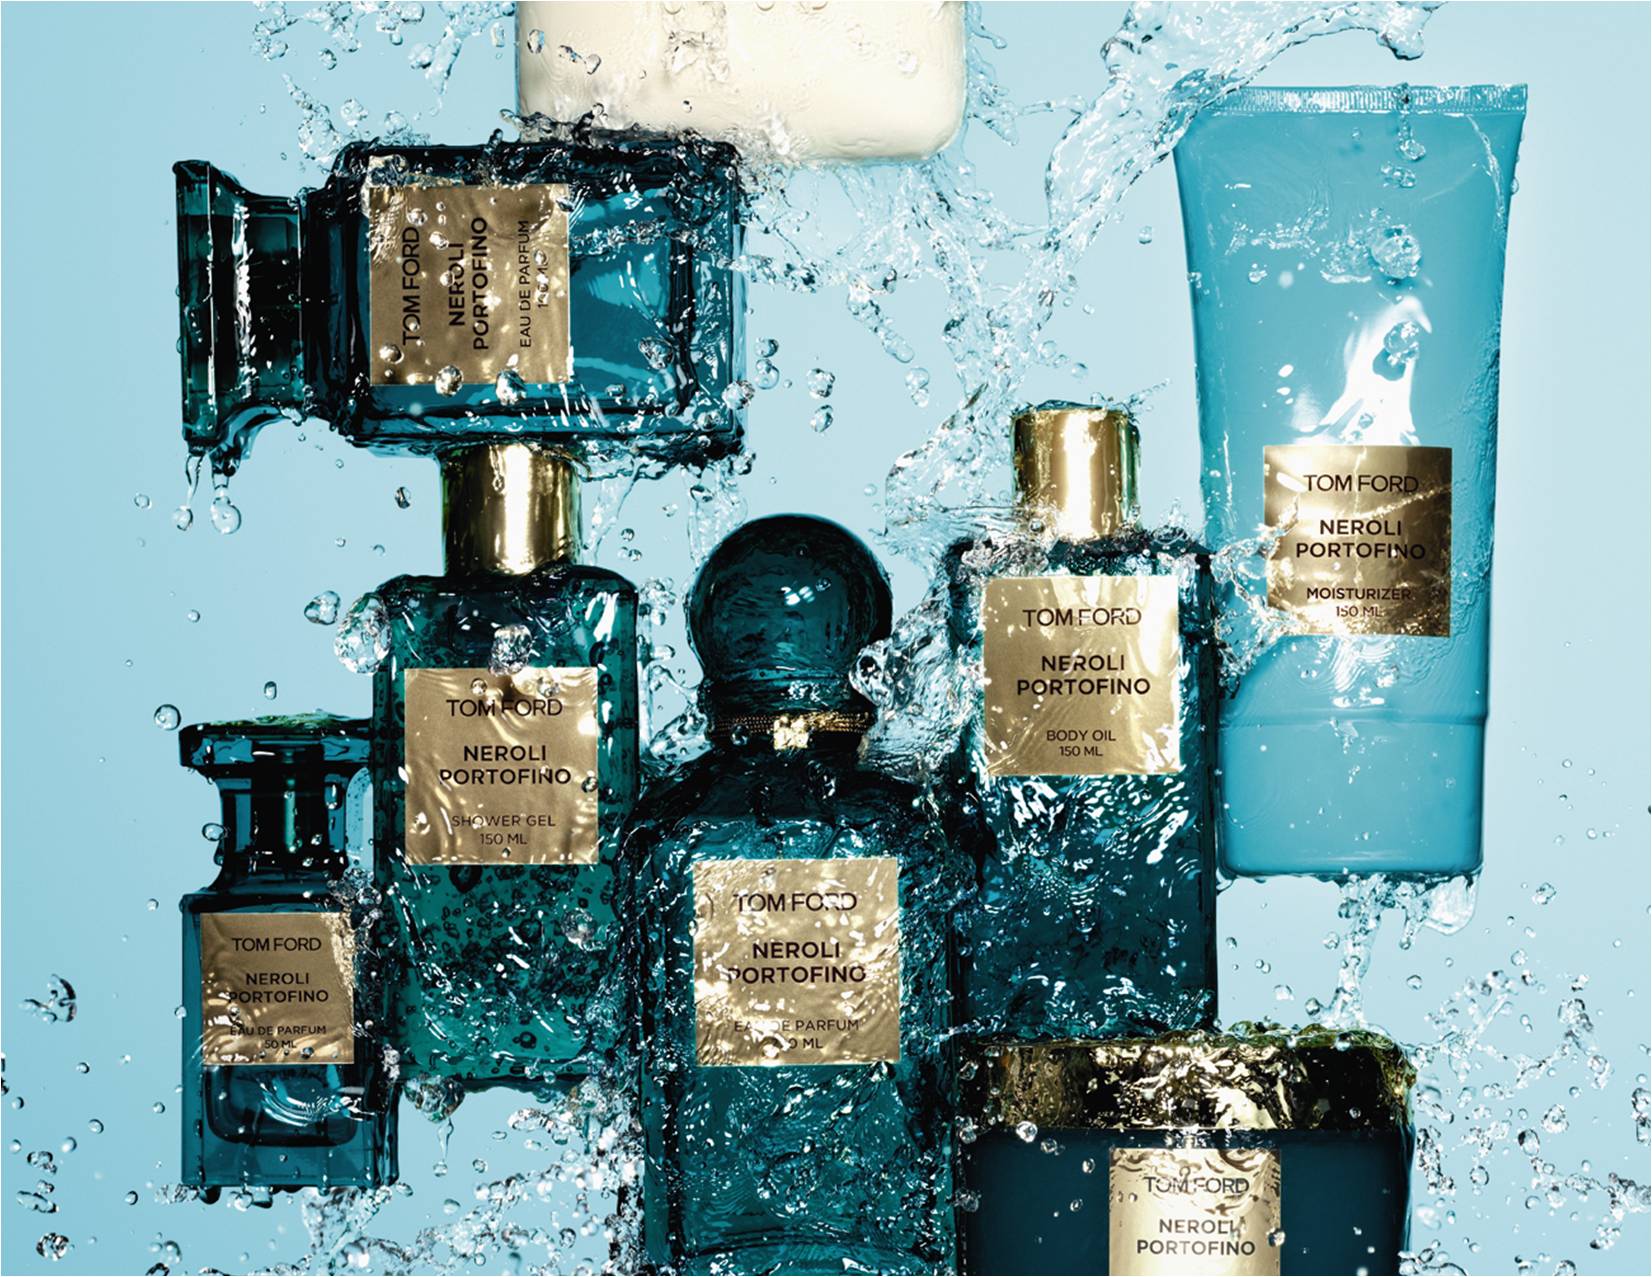 Shop for samples of Bleu de Chanel Parfum (Parfum) by Chanel for men  rebottled and repacked by